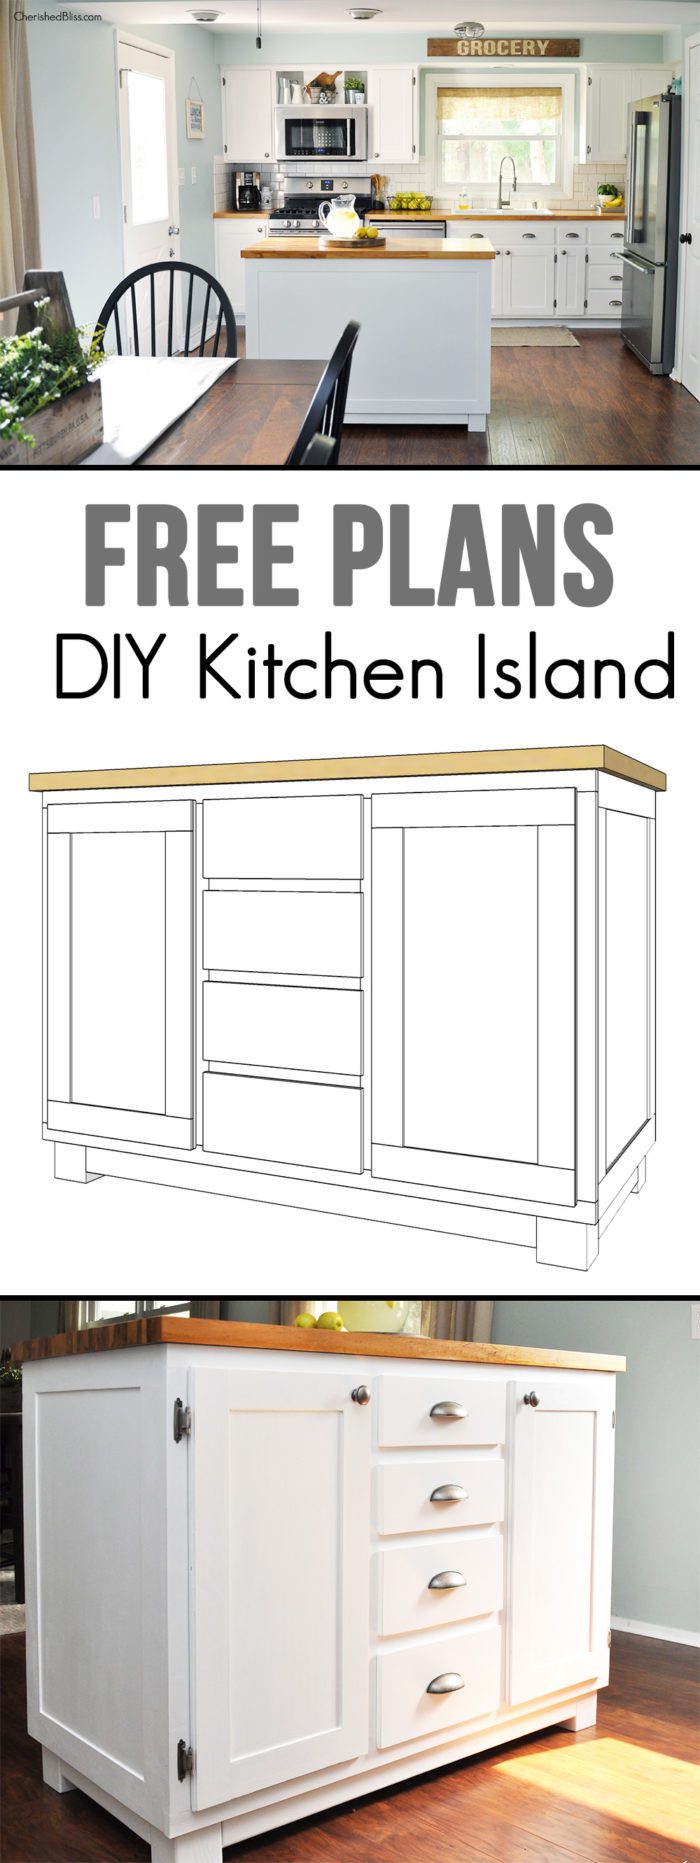 how to build a diy kitchen island - cherished bliss